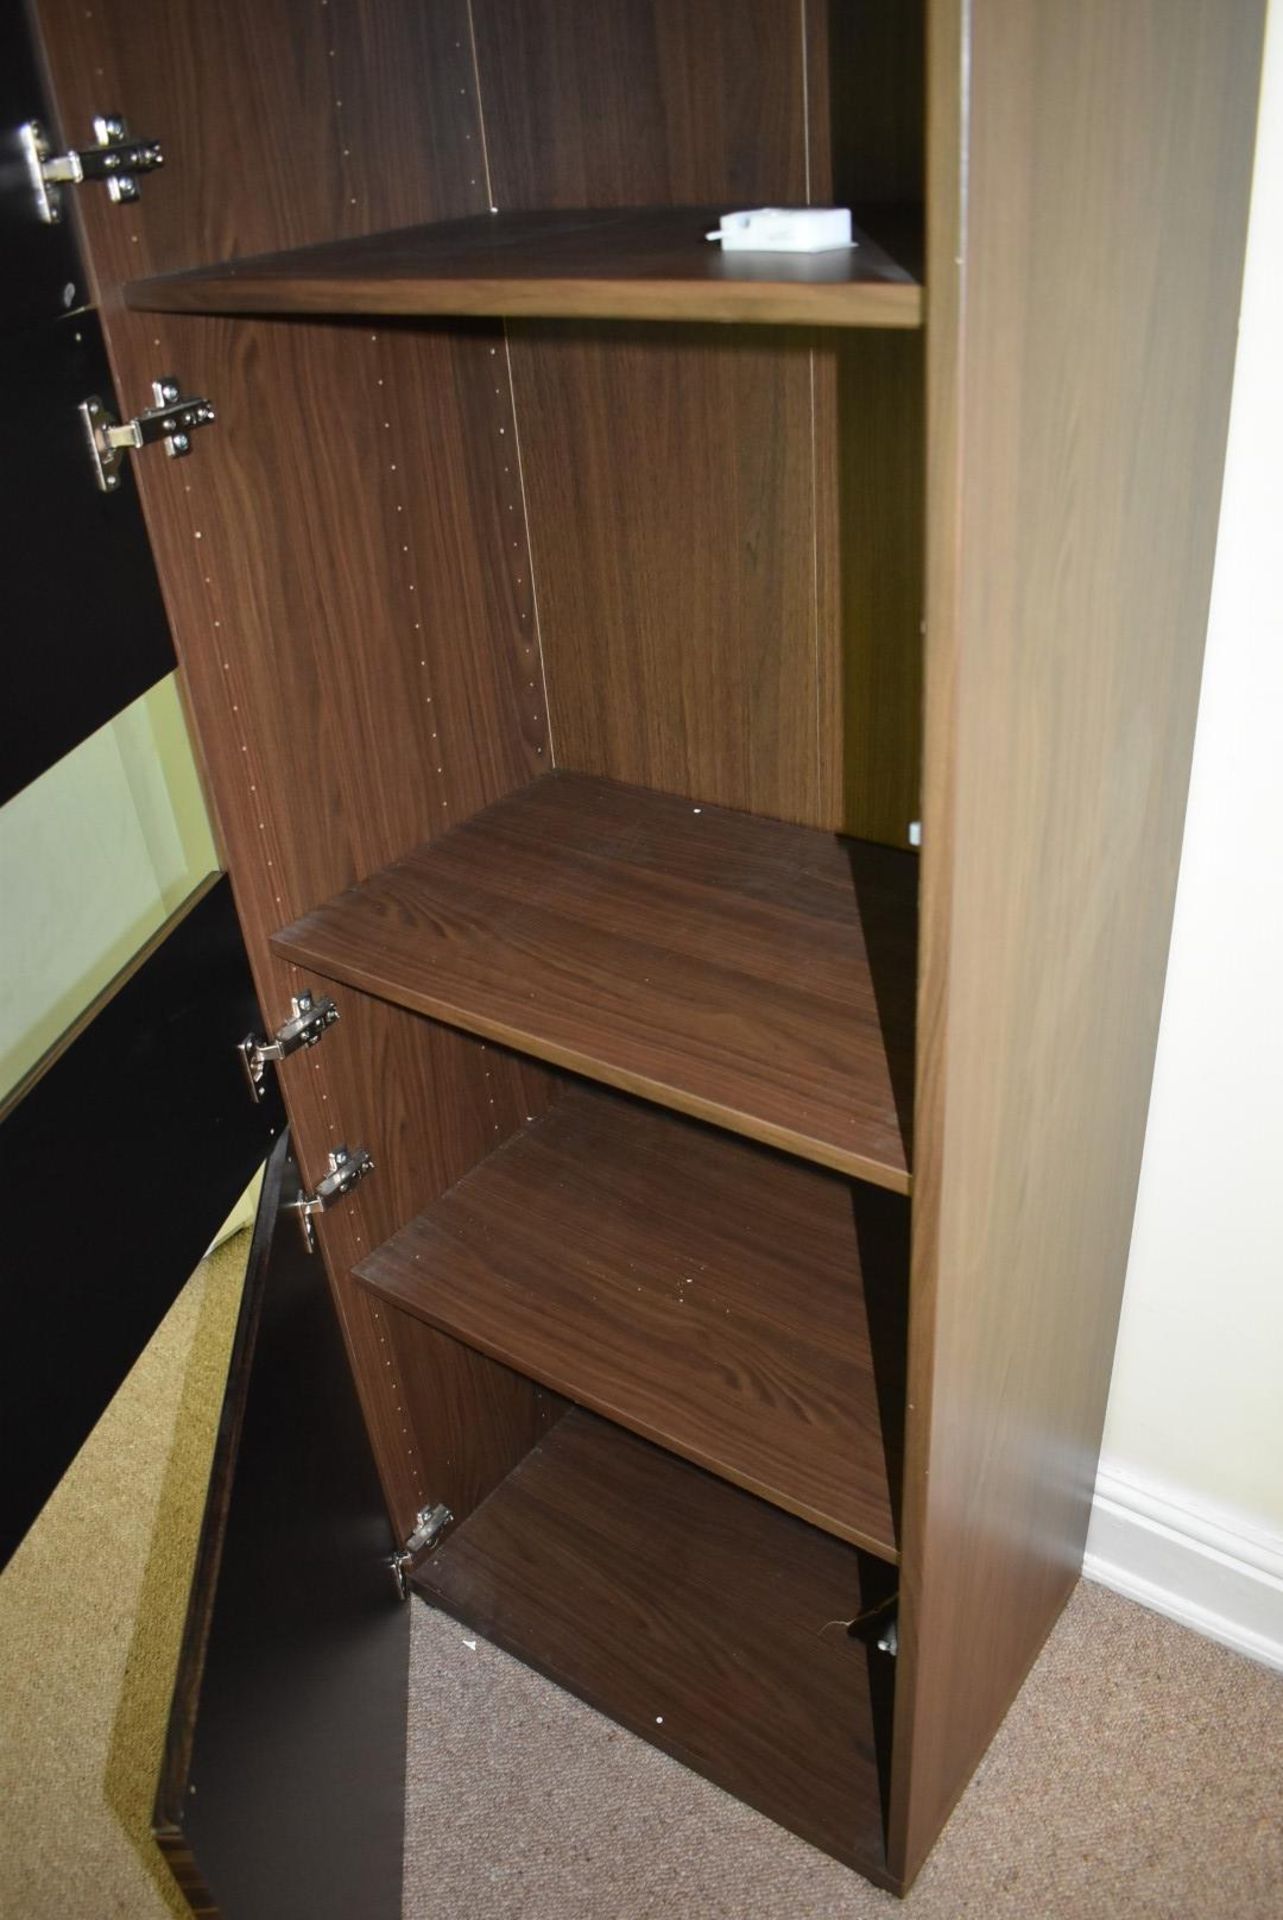 1 x Upright Storage Cabinet With Zebrano Wood Doors - No VAT On The Hammer - CL999 - Location: - Image 5 of 6